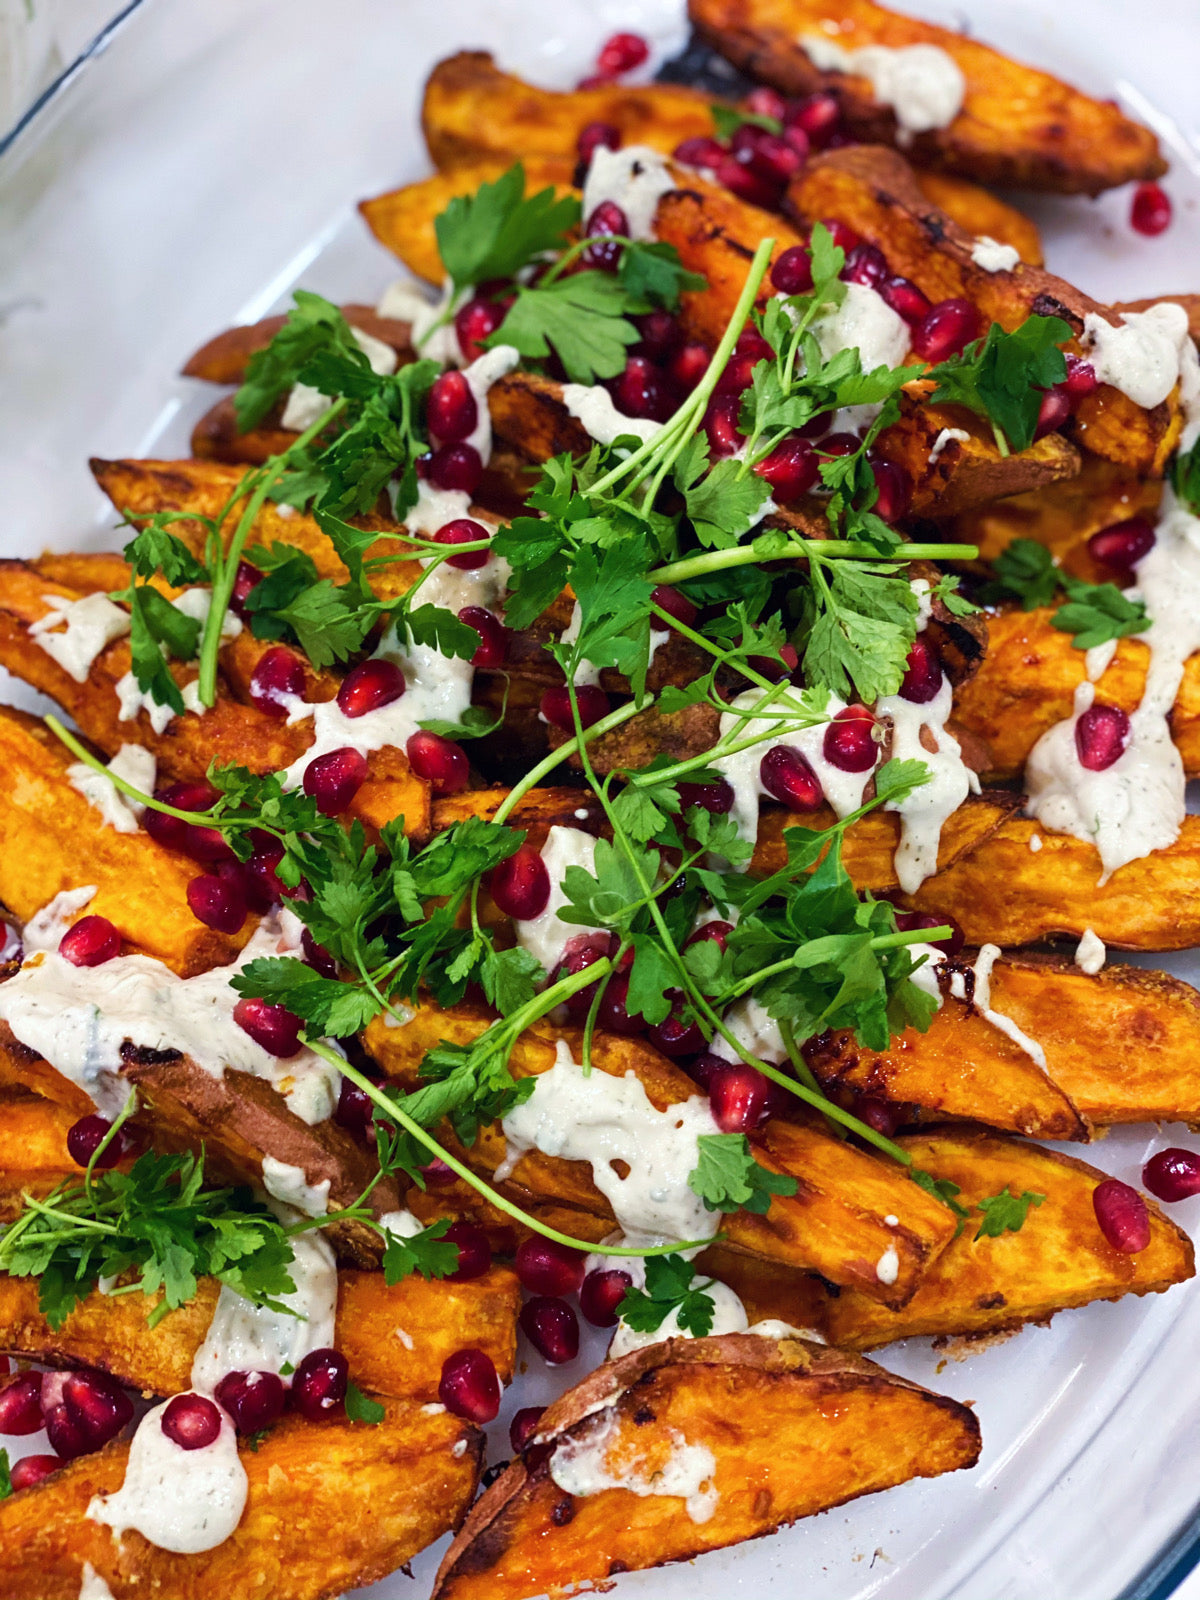 Crispy Sweet Potato Wedges with Chive Sour Cream Drizzle